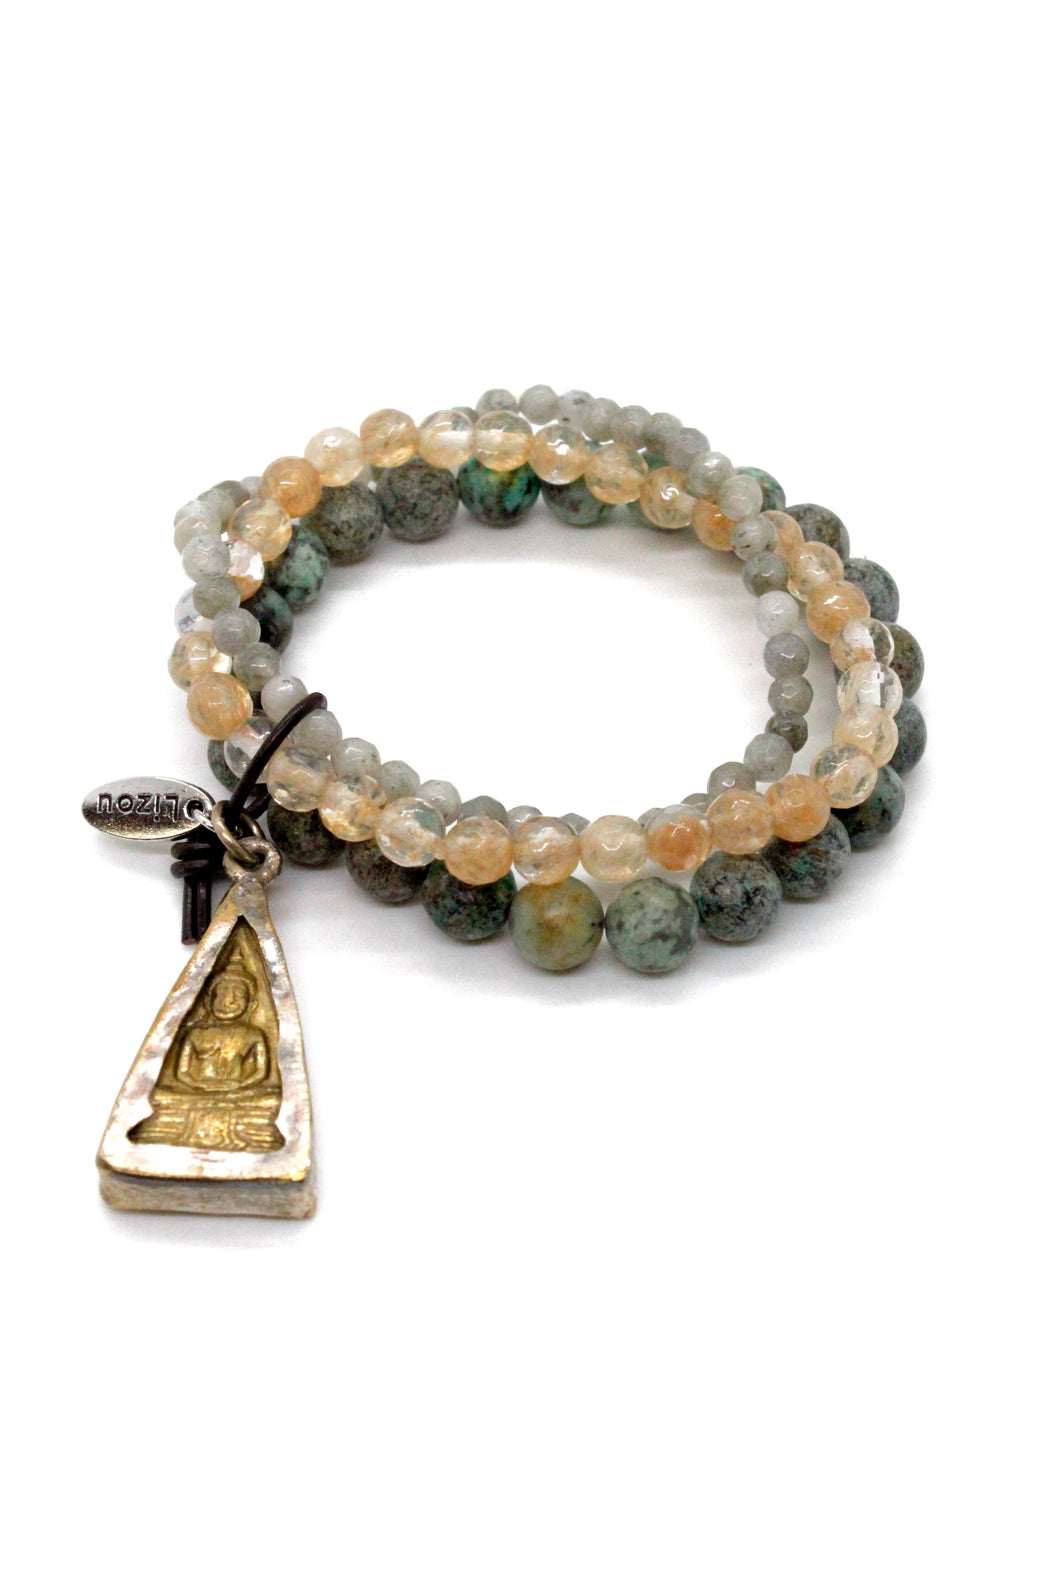 Stone Stack Bracelet with Two Tone Buddha Charm BL-4005-B -The Buddha Collection-